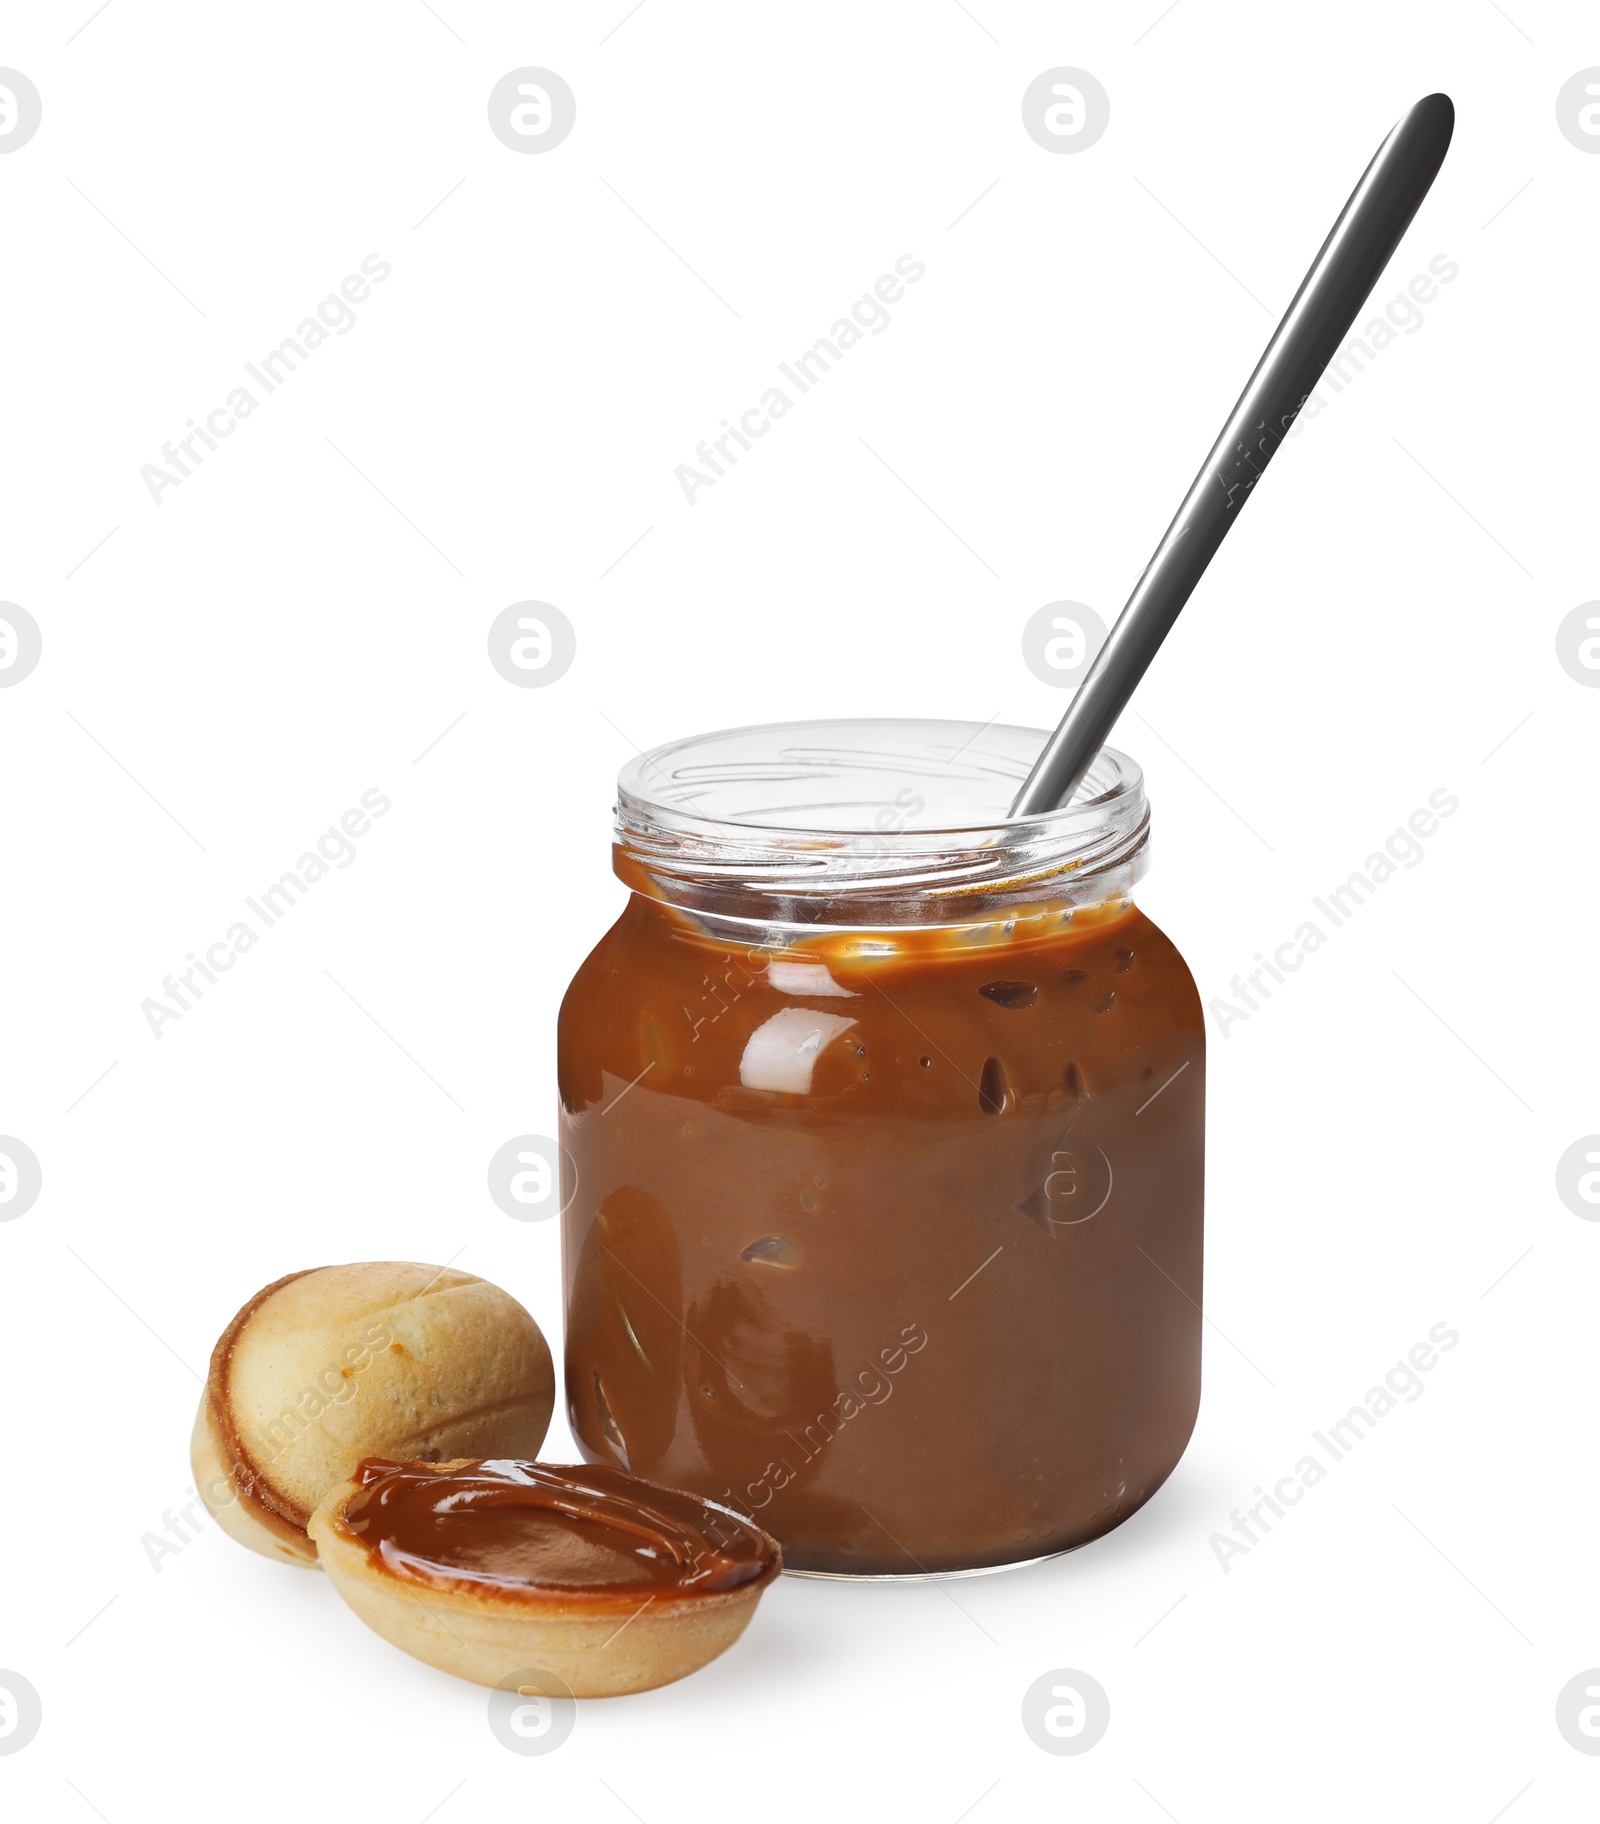 Photo of Jar with boiled condensed milk, spoon and walnut shaped cookies on white background